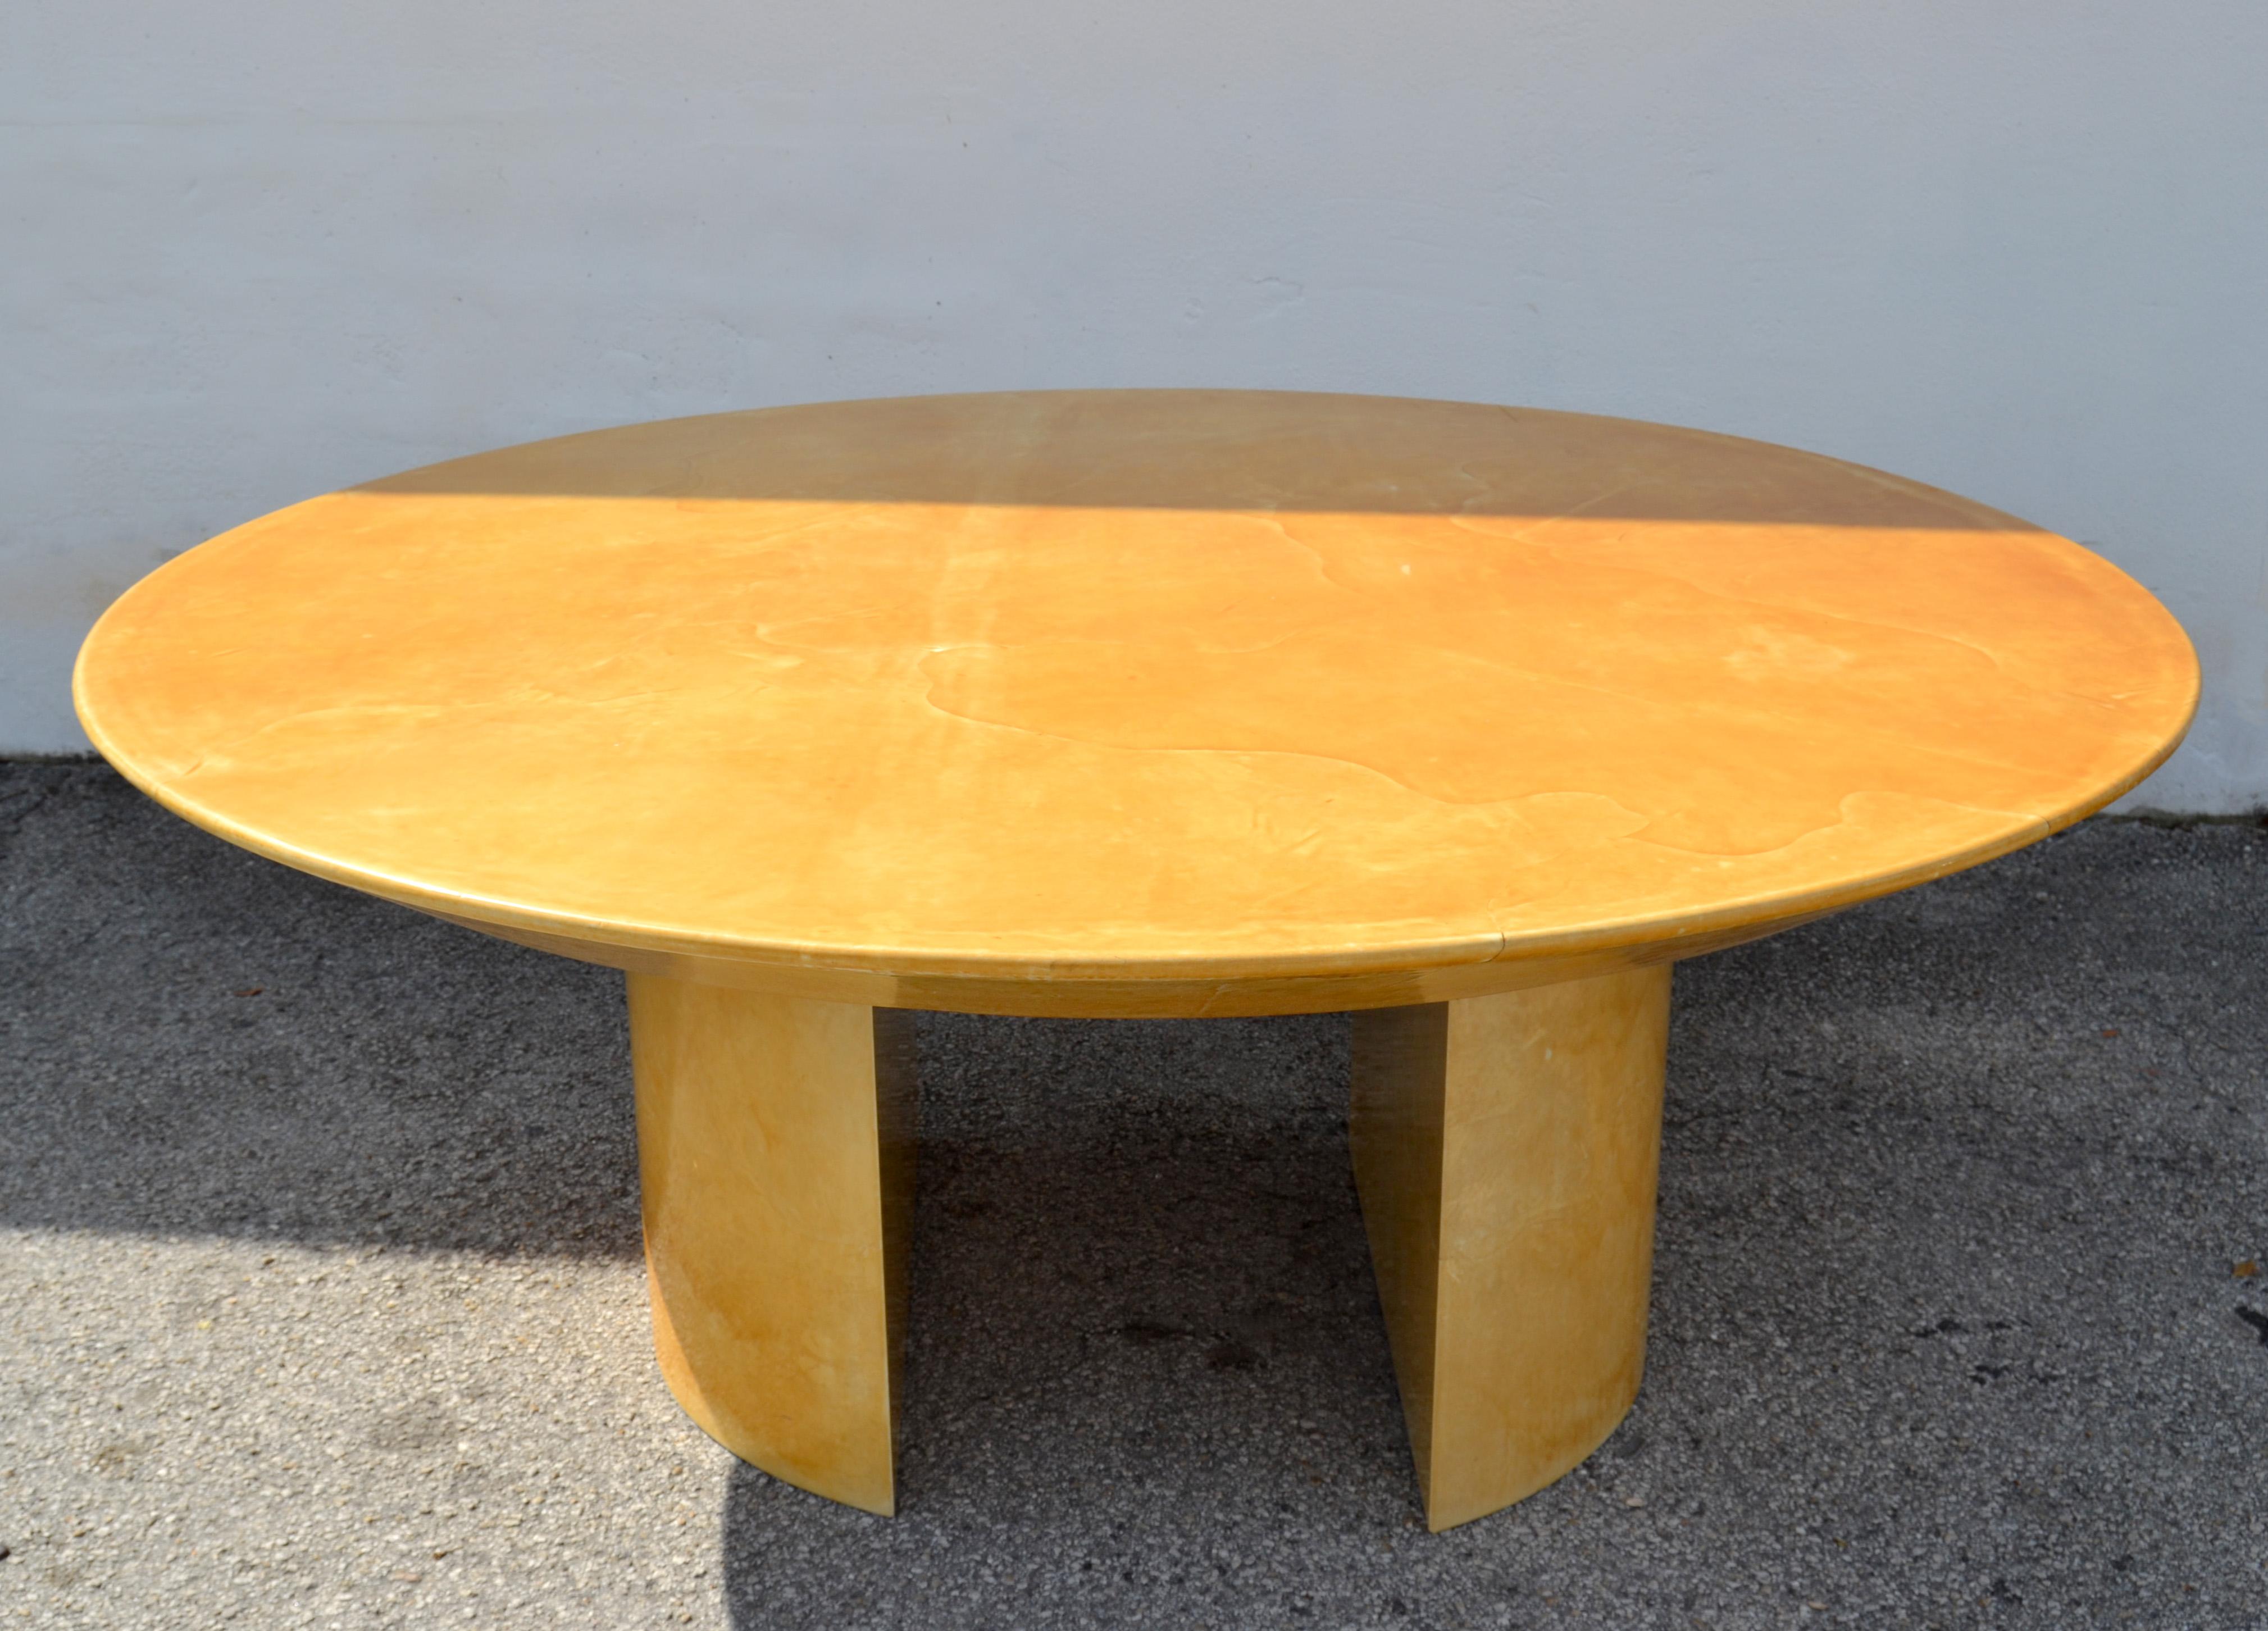 For Sale is this large almost round floating Karl Springer dining table on two half round pedestal bases, made in America in the 1970. 
All wood core decorated with the Goat Skin and lacquered for long lasting beauty.
Original condition with some